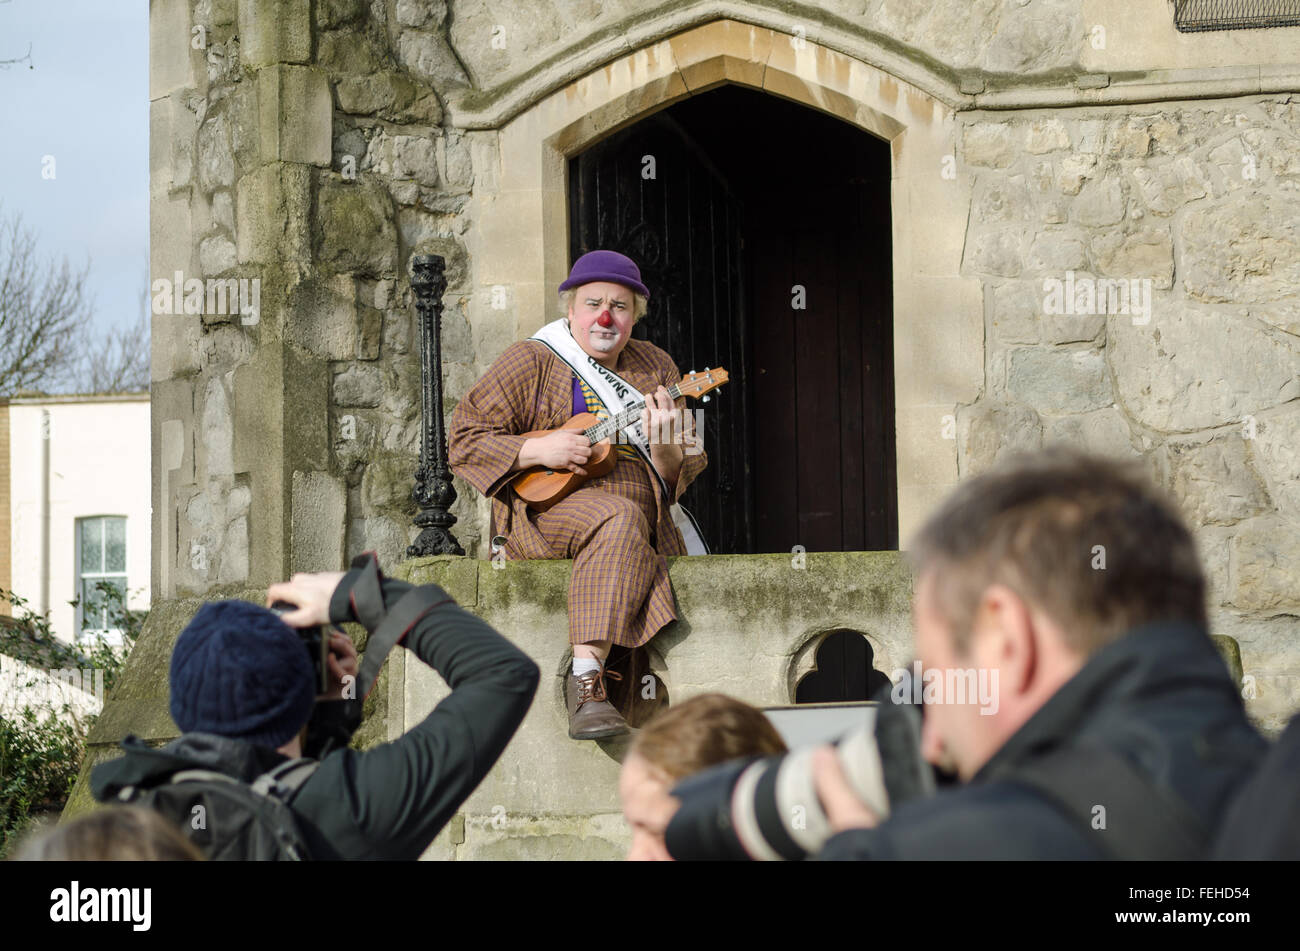 Hackney, London, UK. 7th February, 2016. A clown playing a ukelele poses for photographers outside All Saints Church in Haggerston ahead of the annual Clown Service in memory of Joseph Grimaldi - known as the King of Clowns. Credit:  Amanda Lewis/Alamy Live News Stock Photo